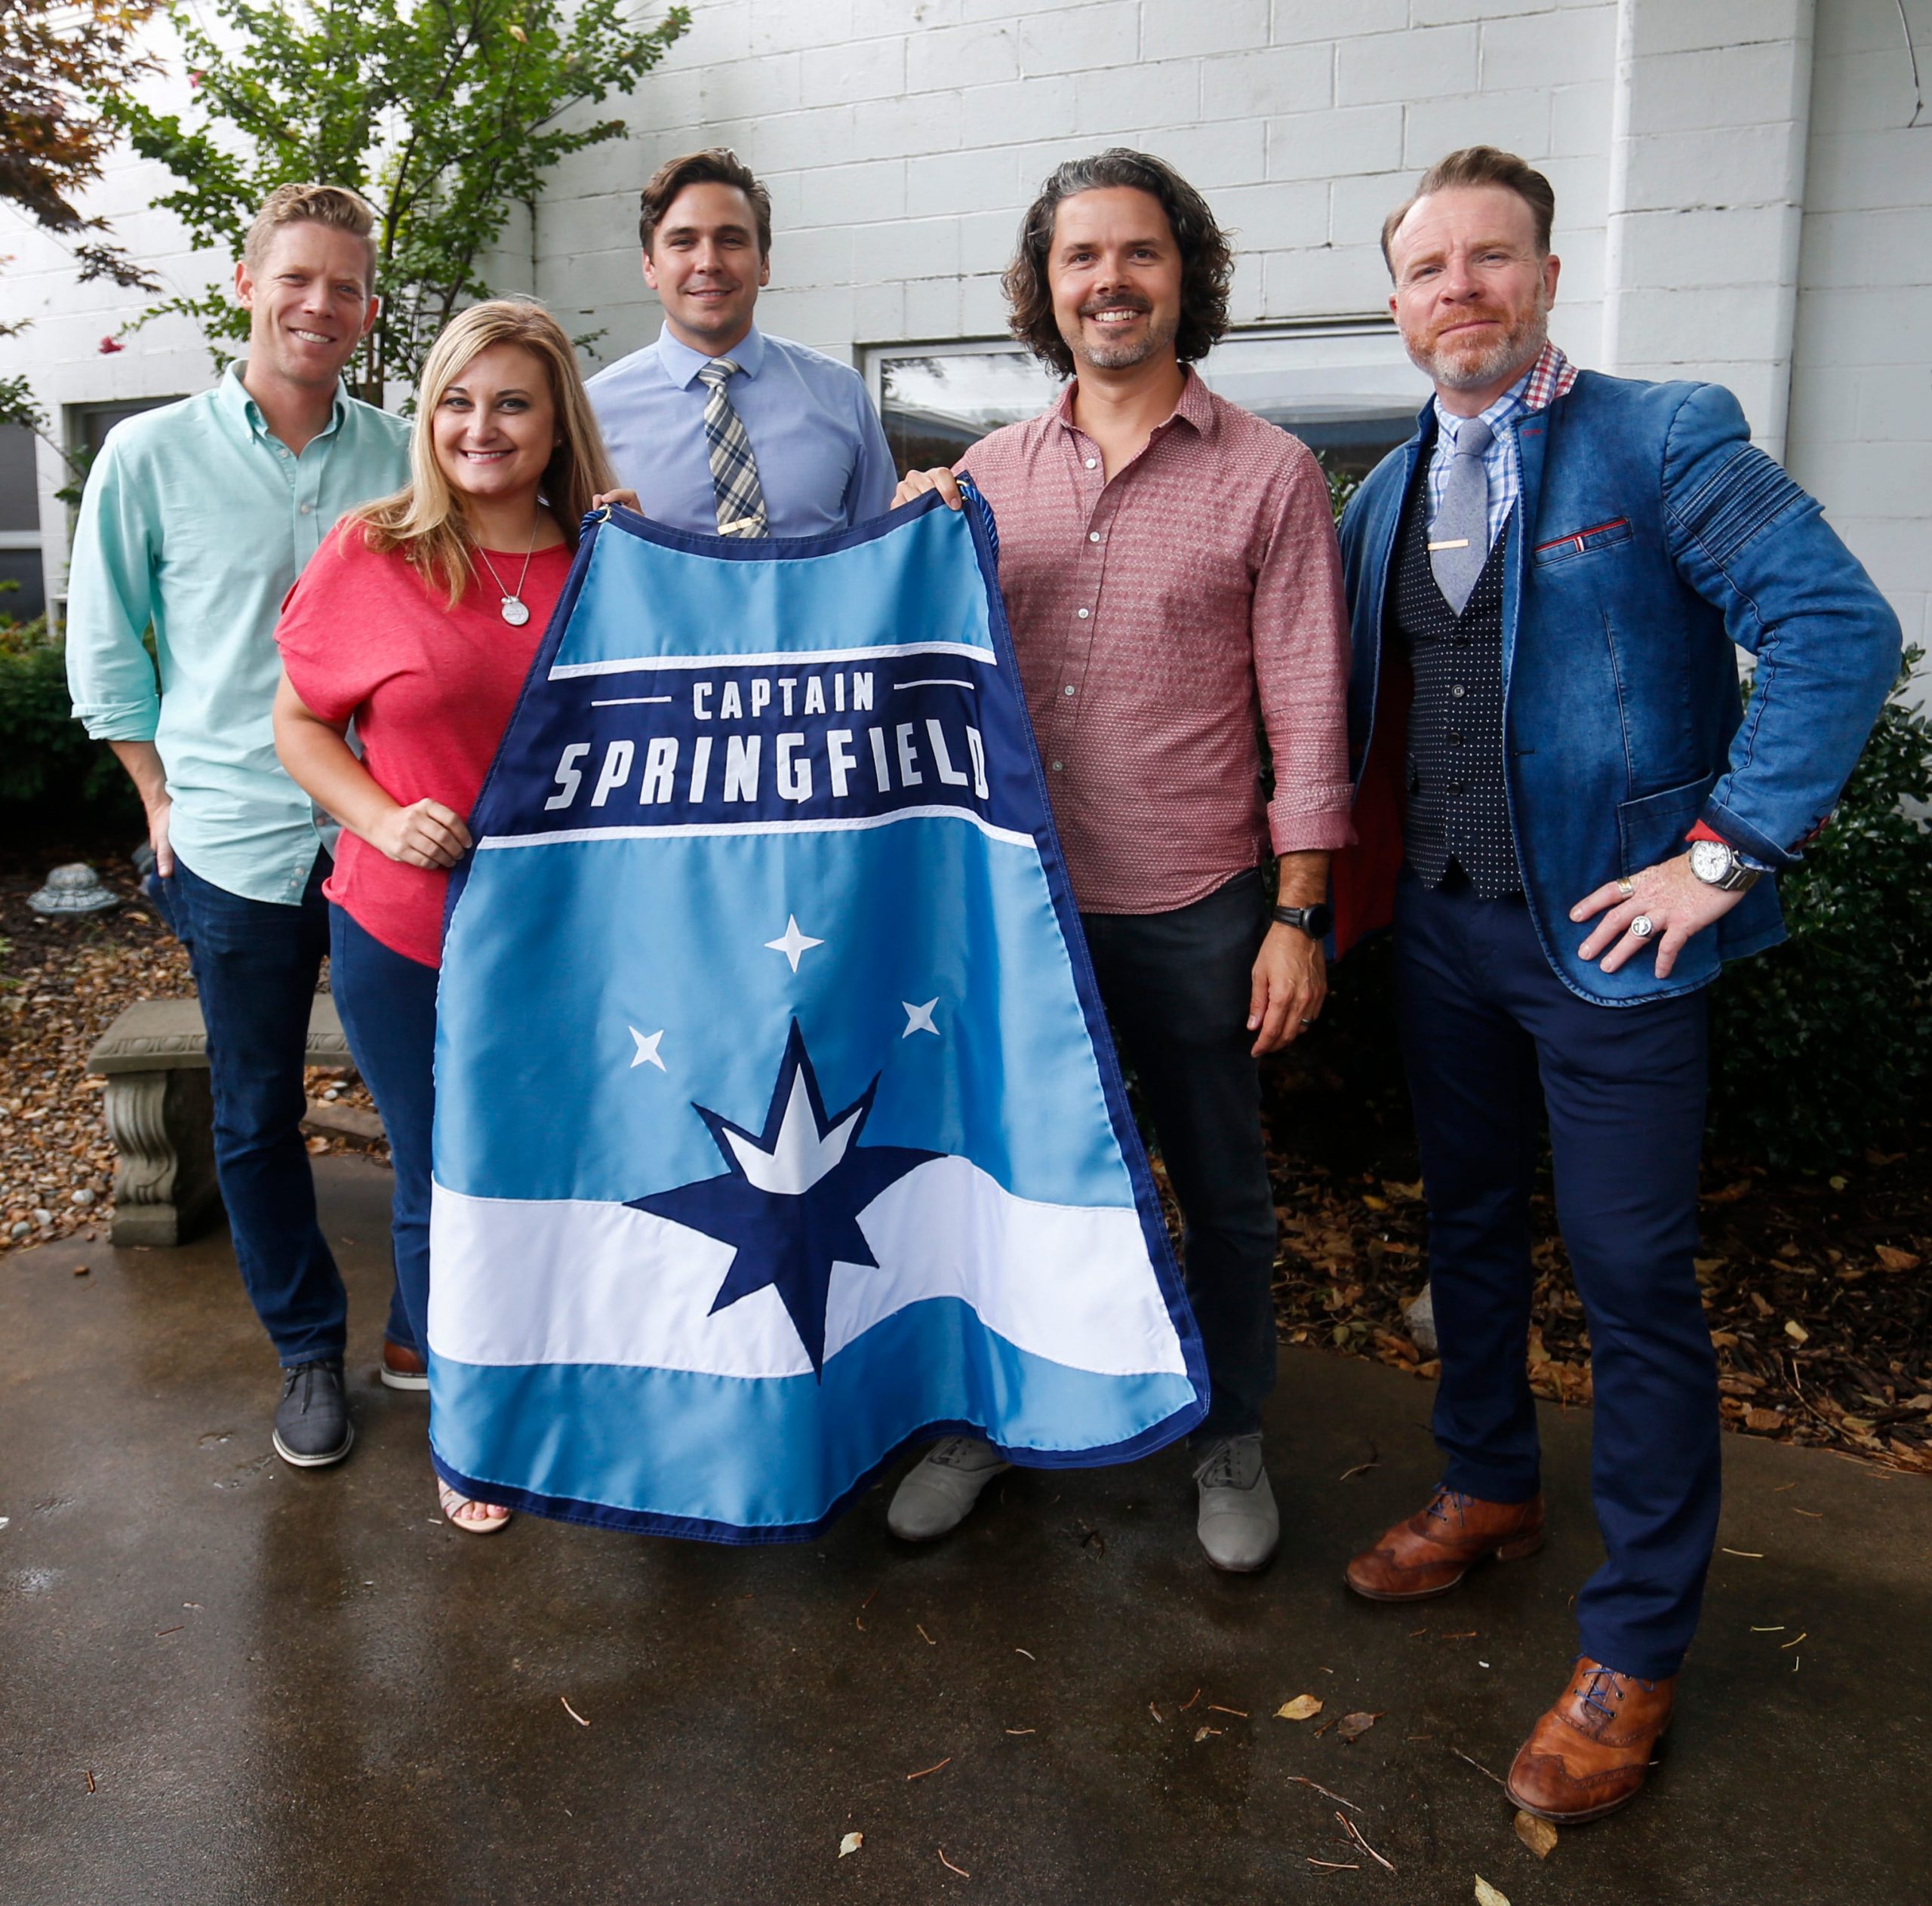 Janelle Reed, the outreach and special events manager for Victory Mission, is presented a Captain Springfield cape by (from left) Jeff Houghton, Joel Thomas, John McQueary and Sean Brownfield.
